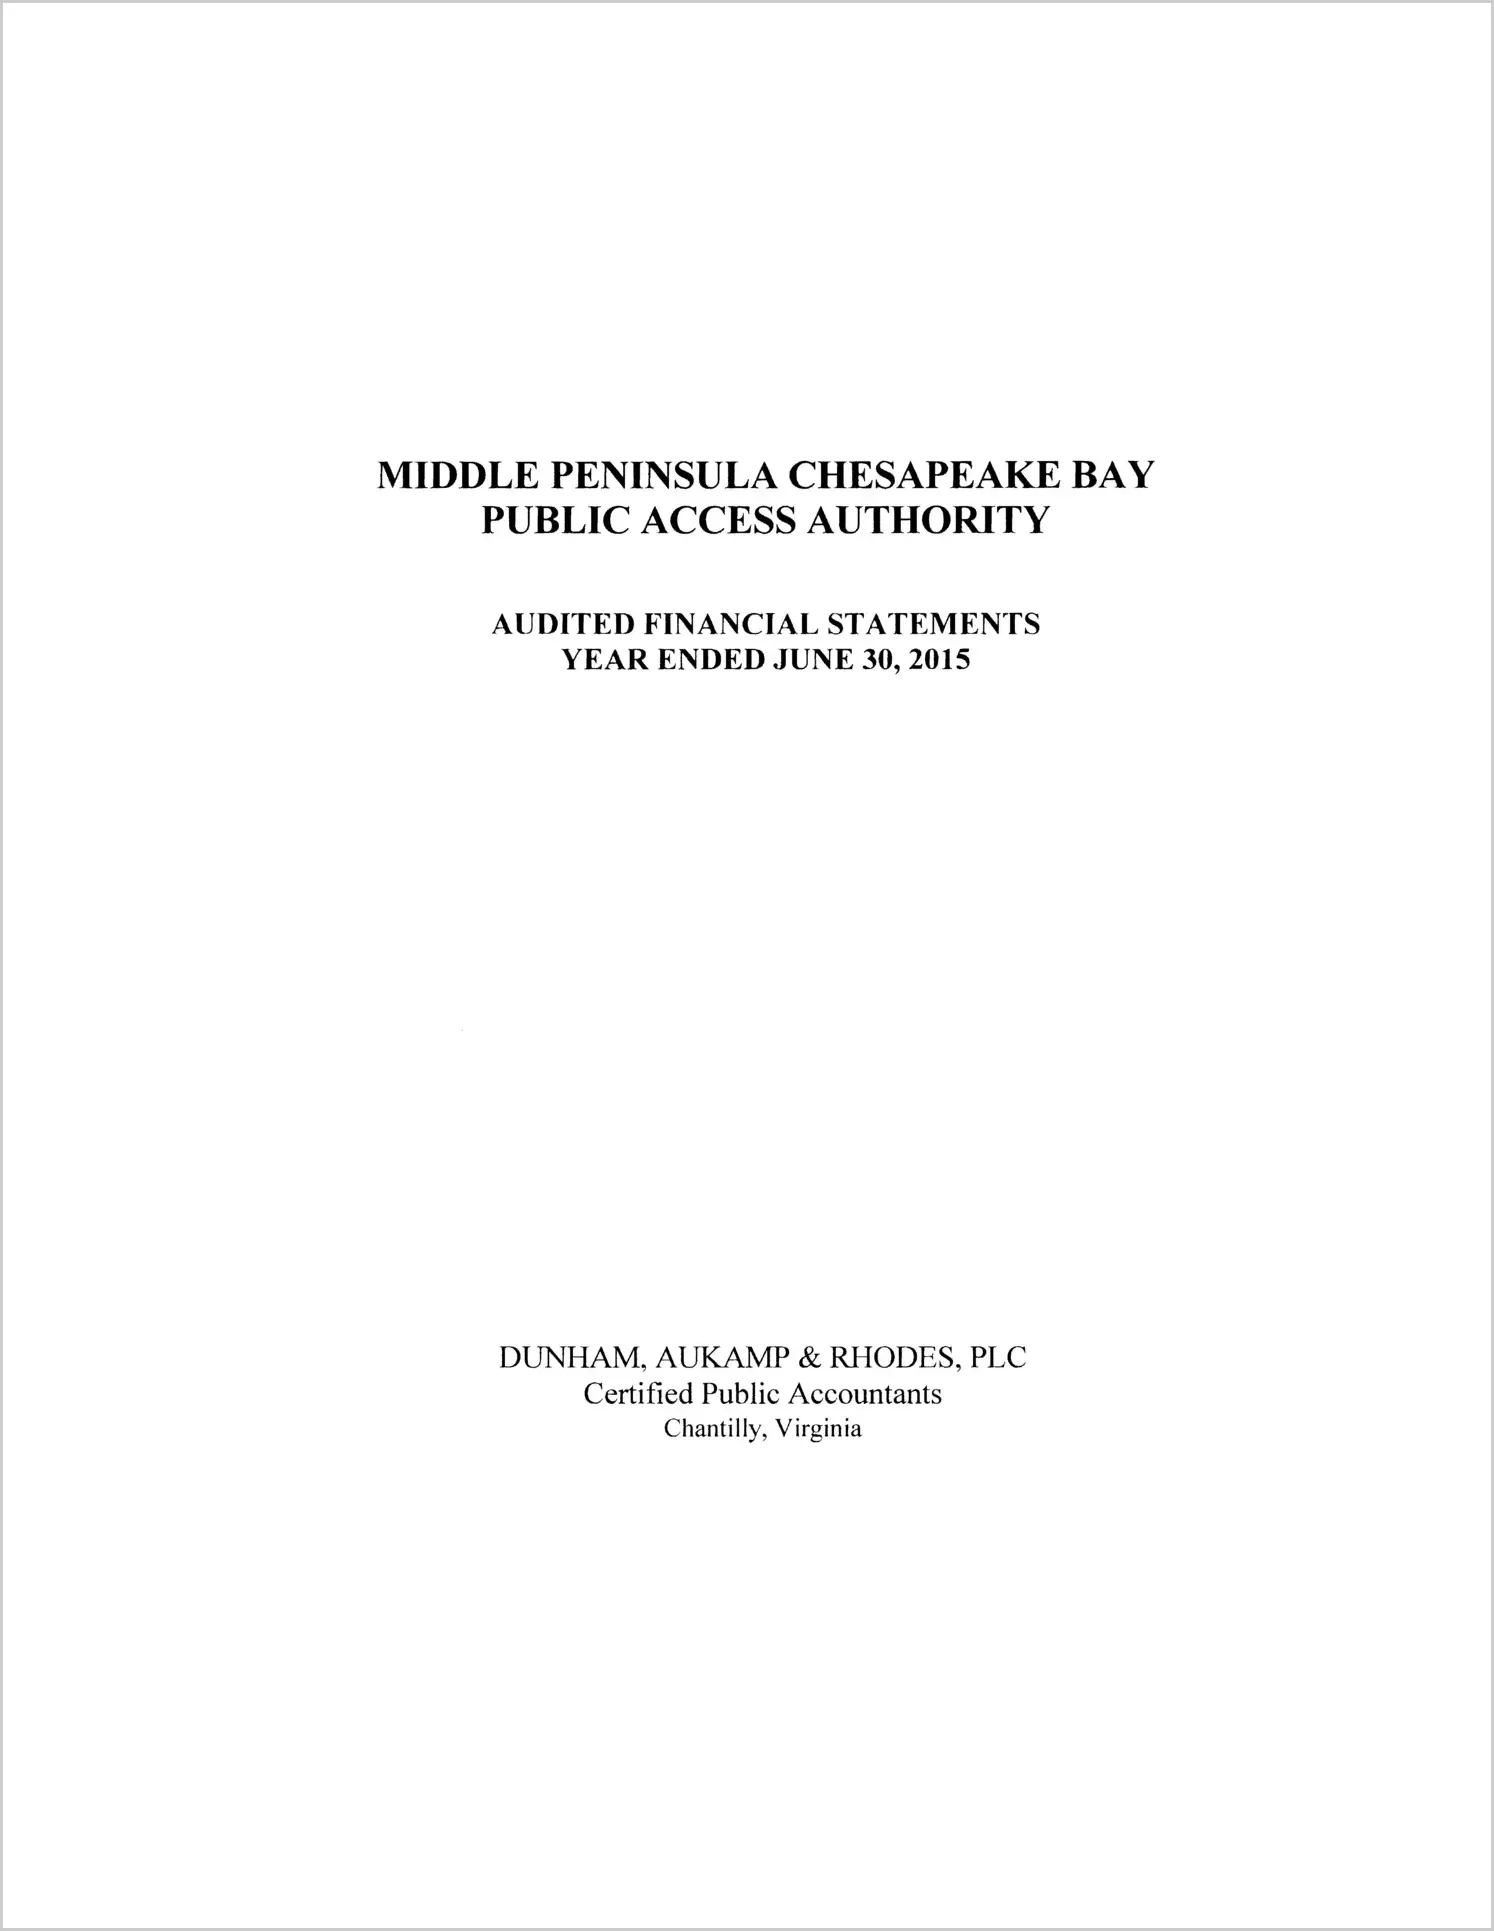 2015 ABC/Other Annual Financial Report  for Middle Peninsula Chesapeake Bay Public Access Authority